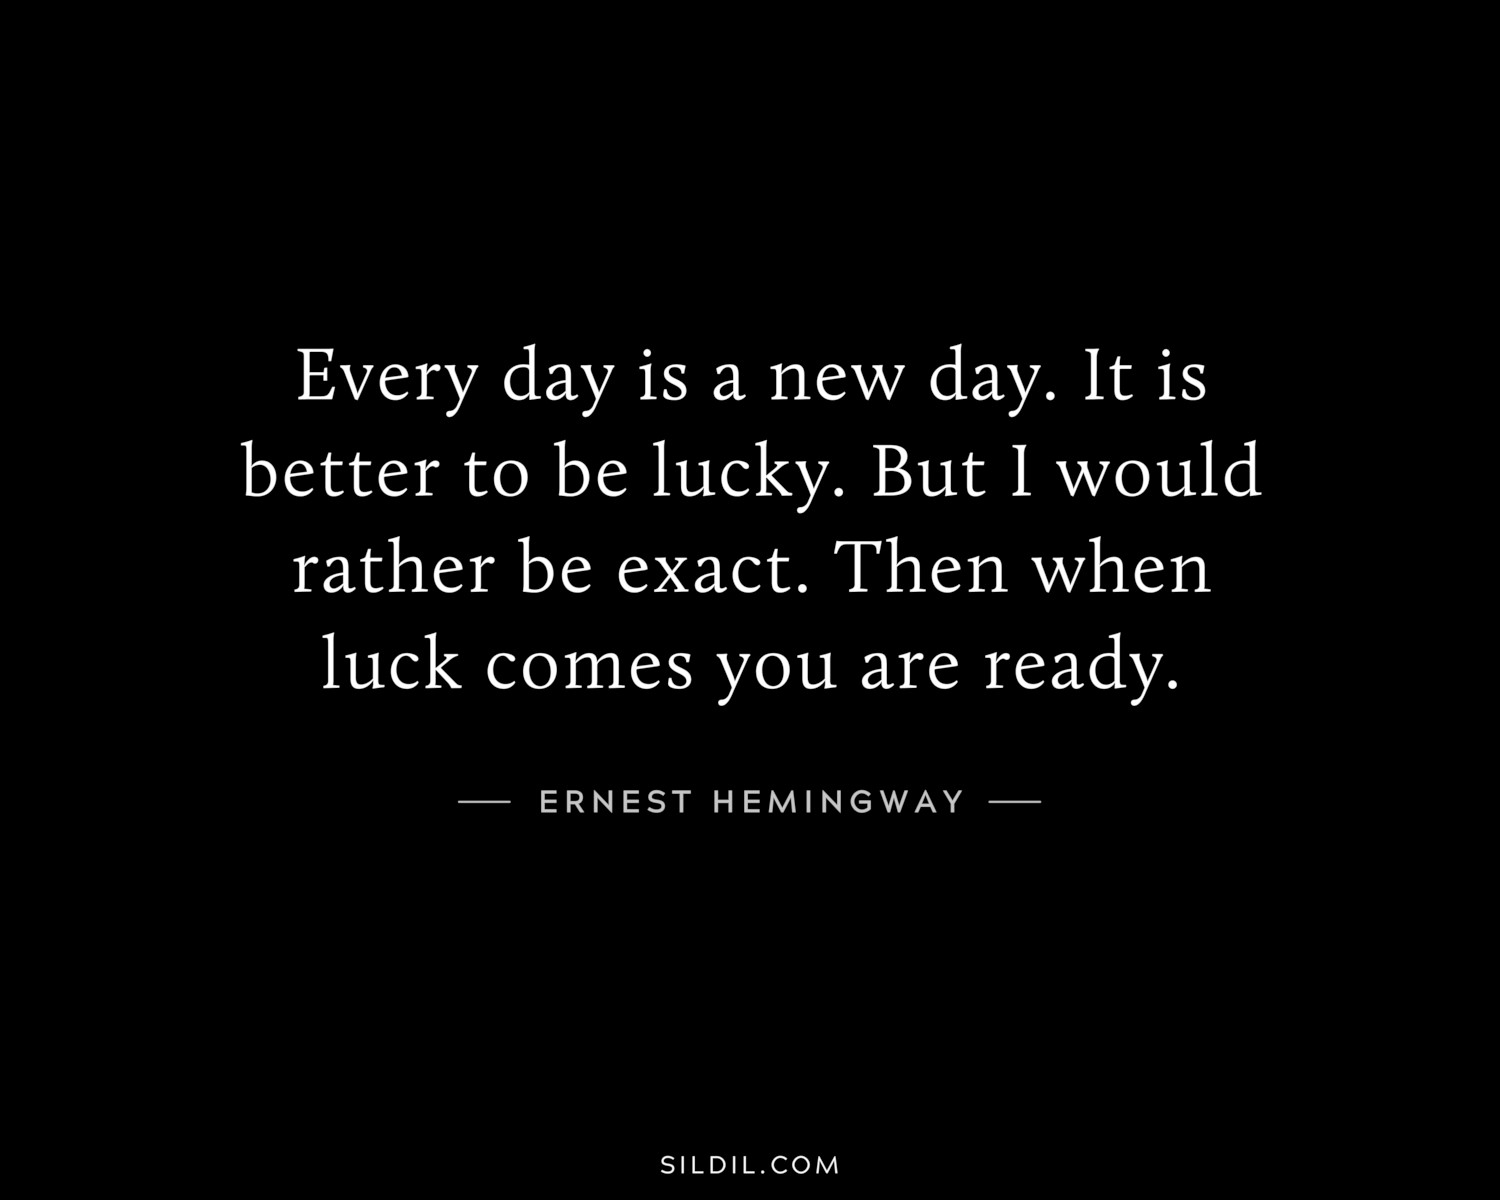 Every day is a new day. It is better to be lucky. But I would rather be exact. Then when luck comes you are ready.